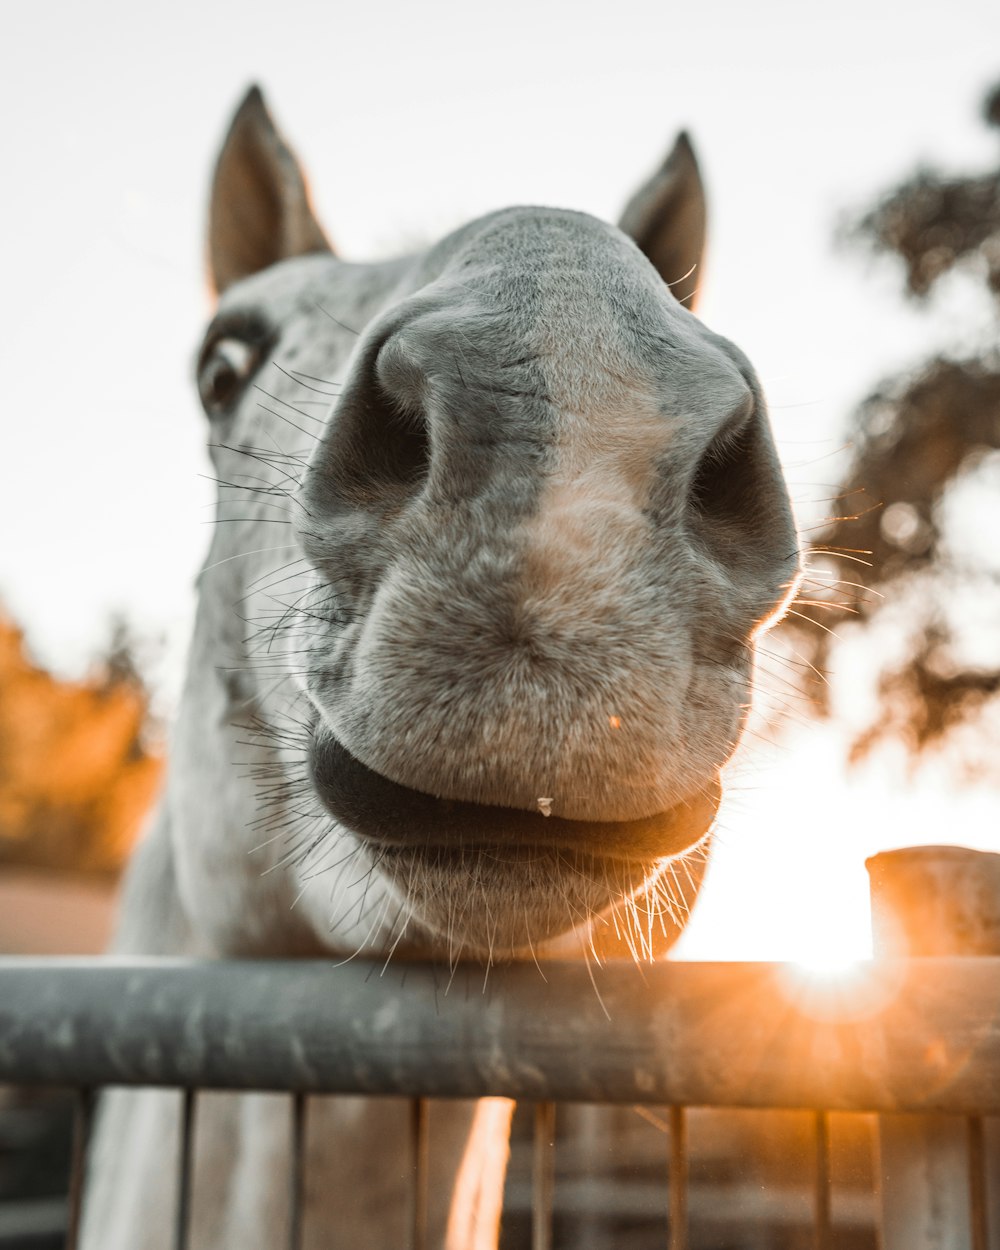 a close up of a horse looking over a fence